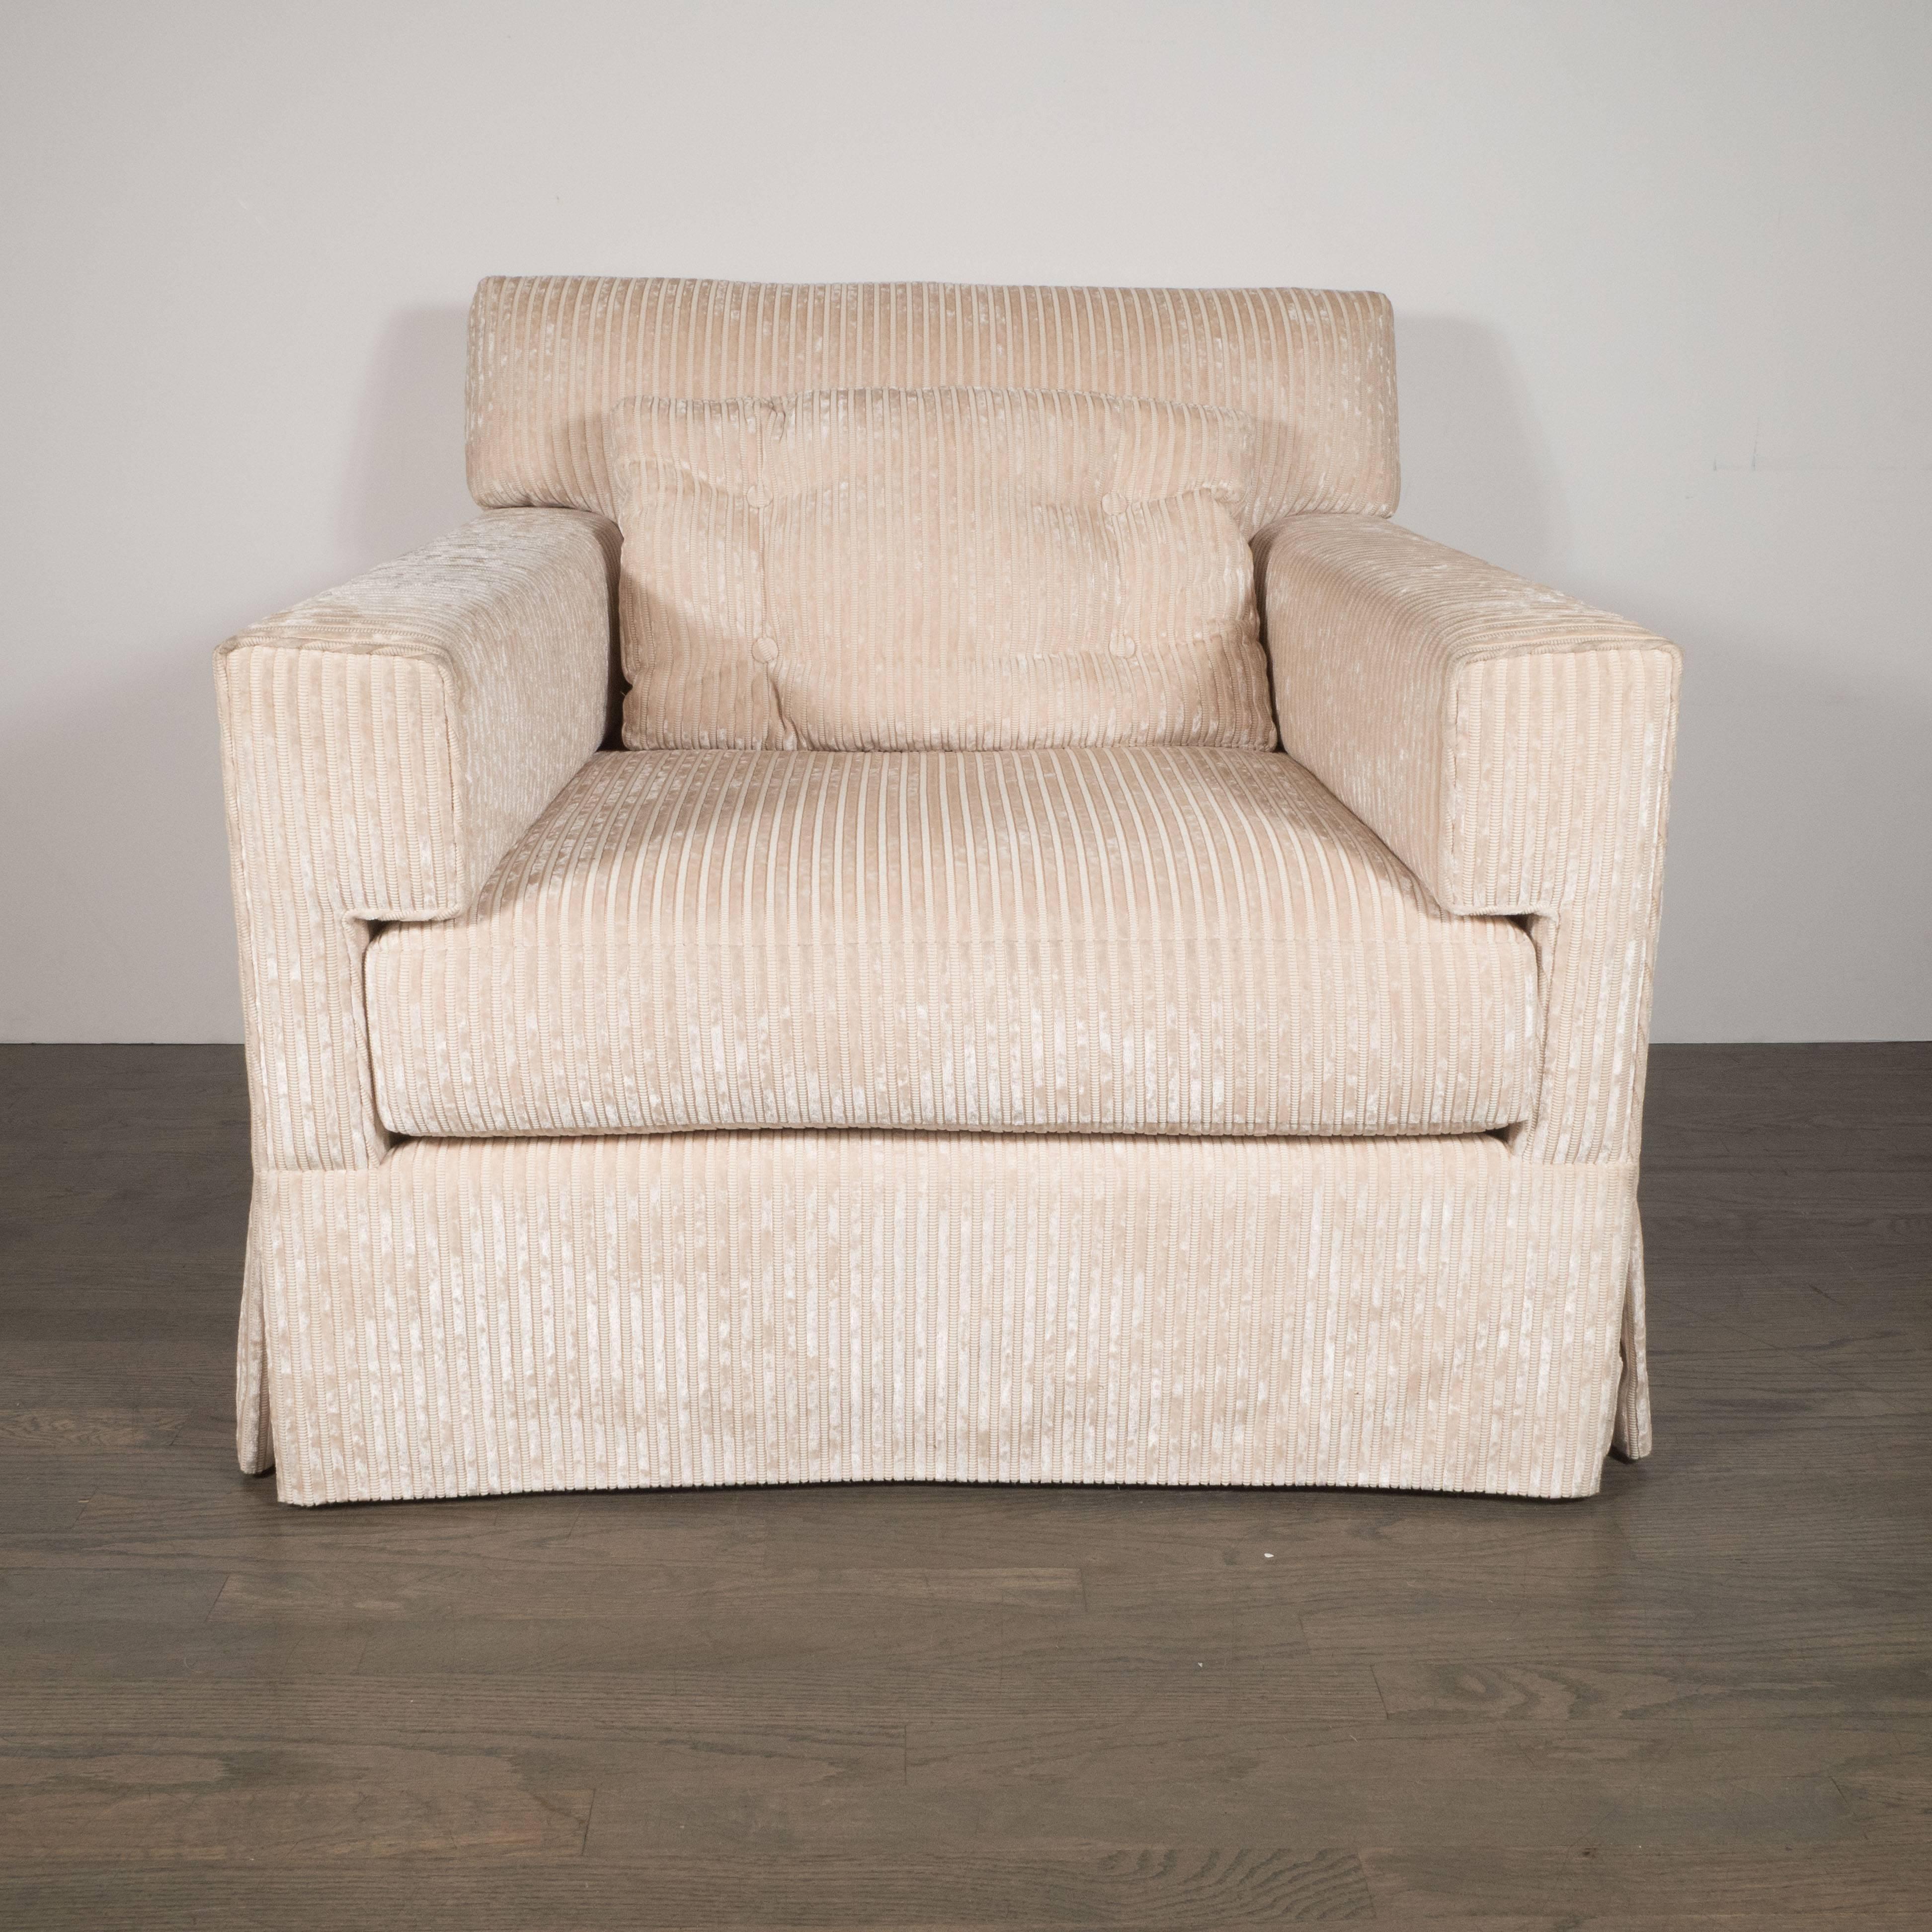 This modernist pair of swivel arm or club chairs has been upholstered in a luxe pearl corduroy fabric. With their bold lines and muscular form, these chairs would be a perfect complement to virtually any style of interior- not to mention they are